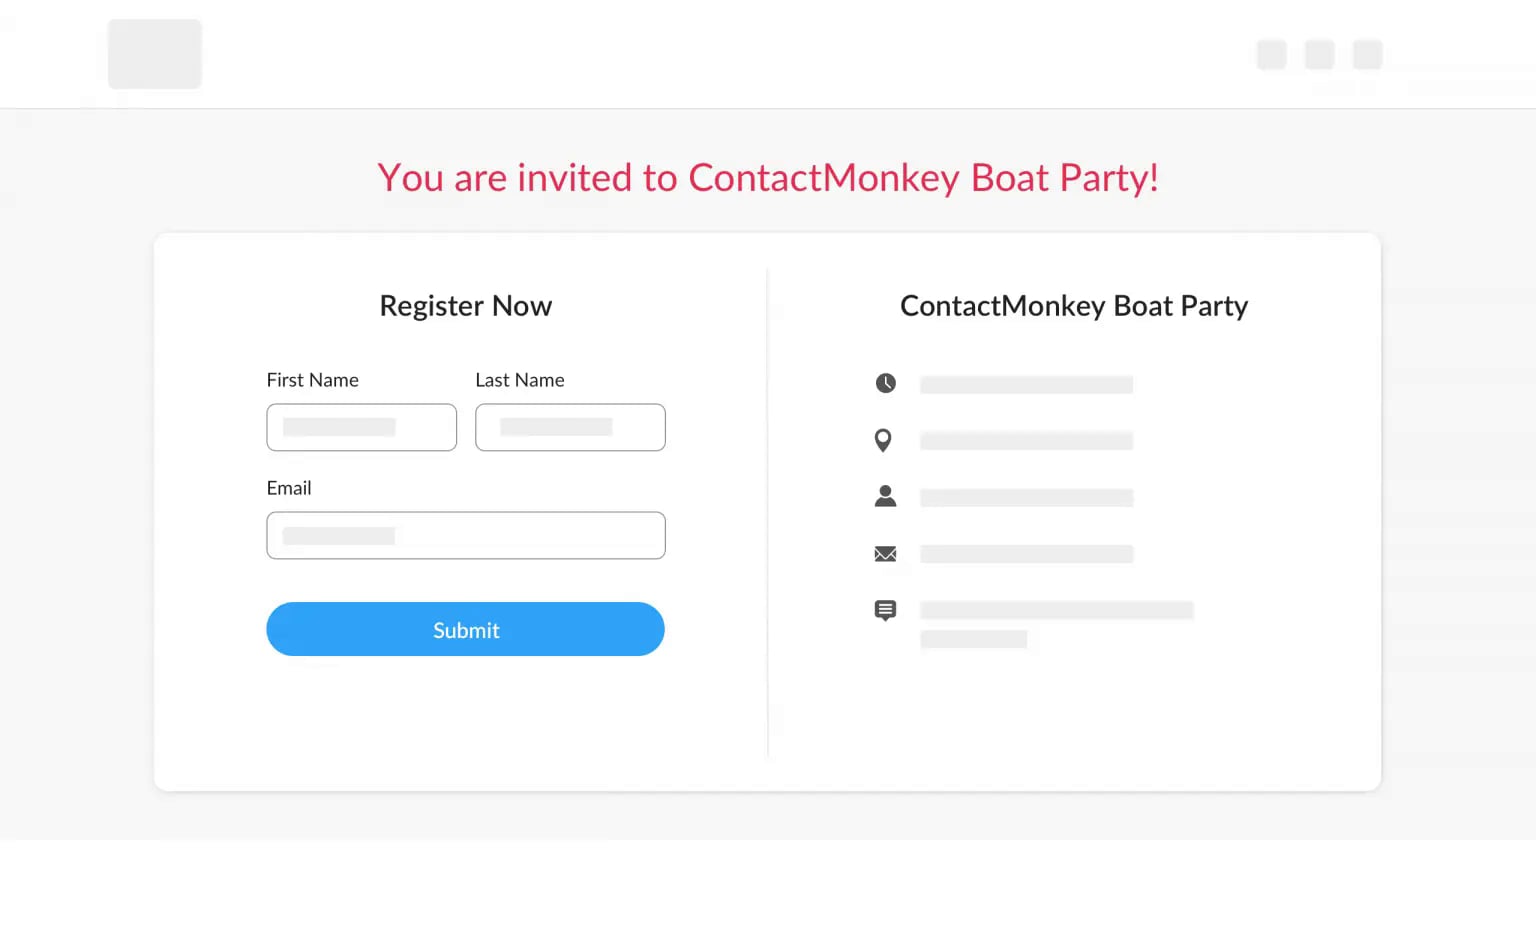 Image of an email event invitation sent using ContactMonkey's event management feature.